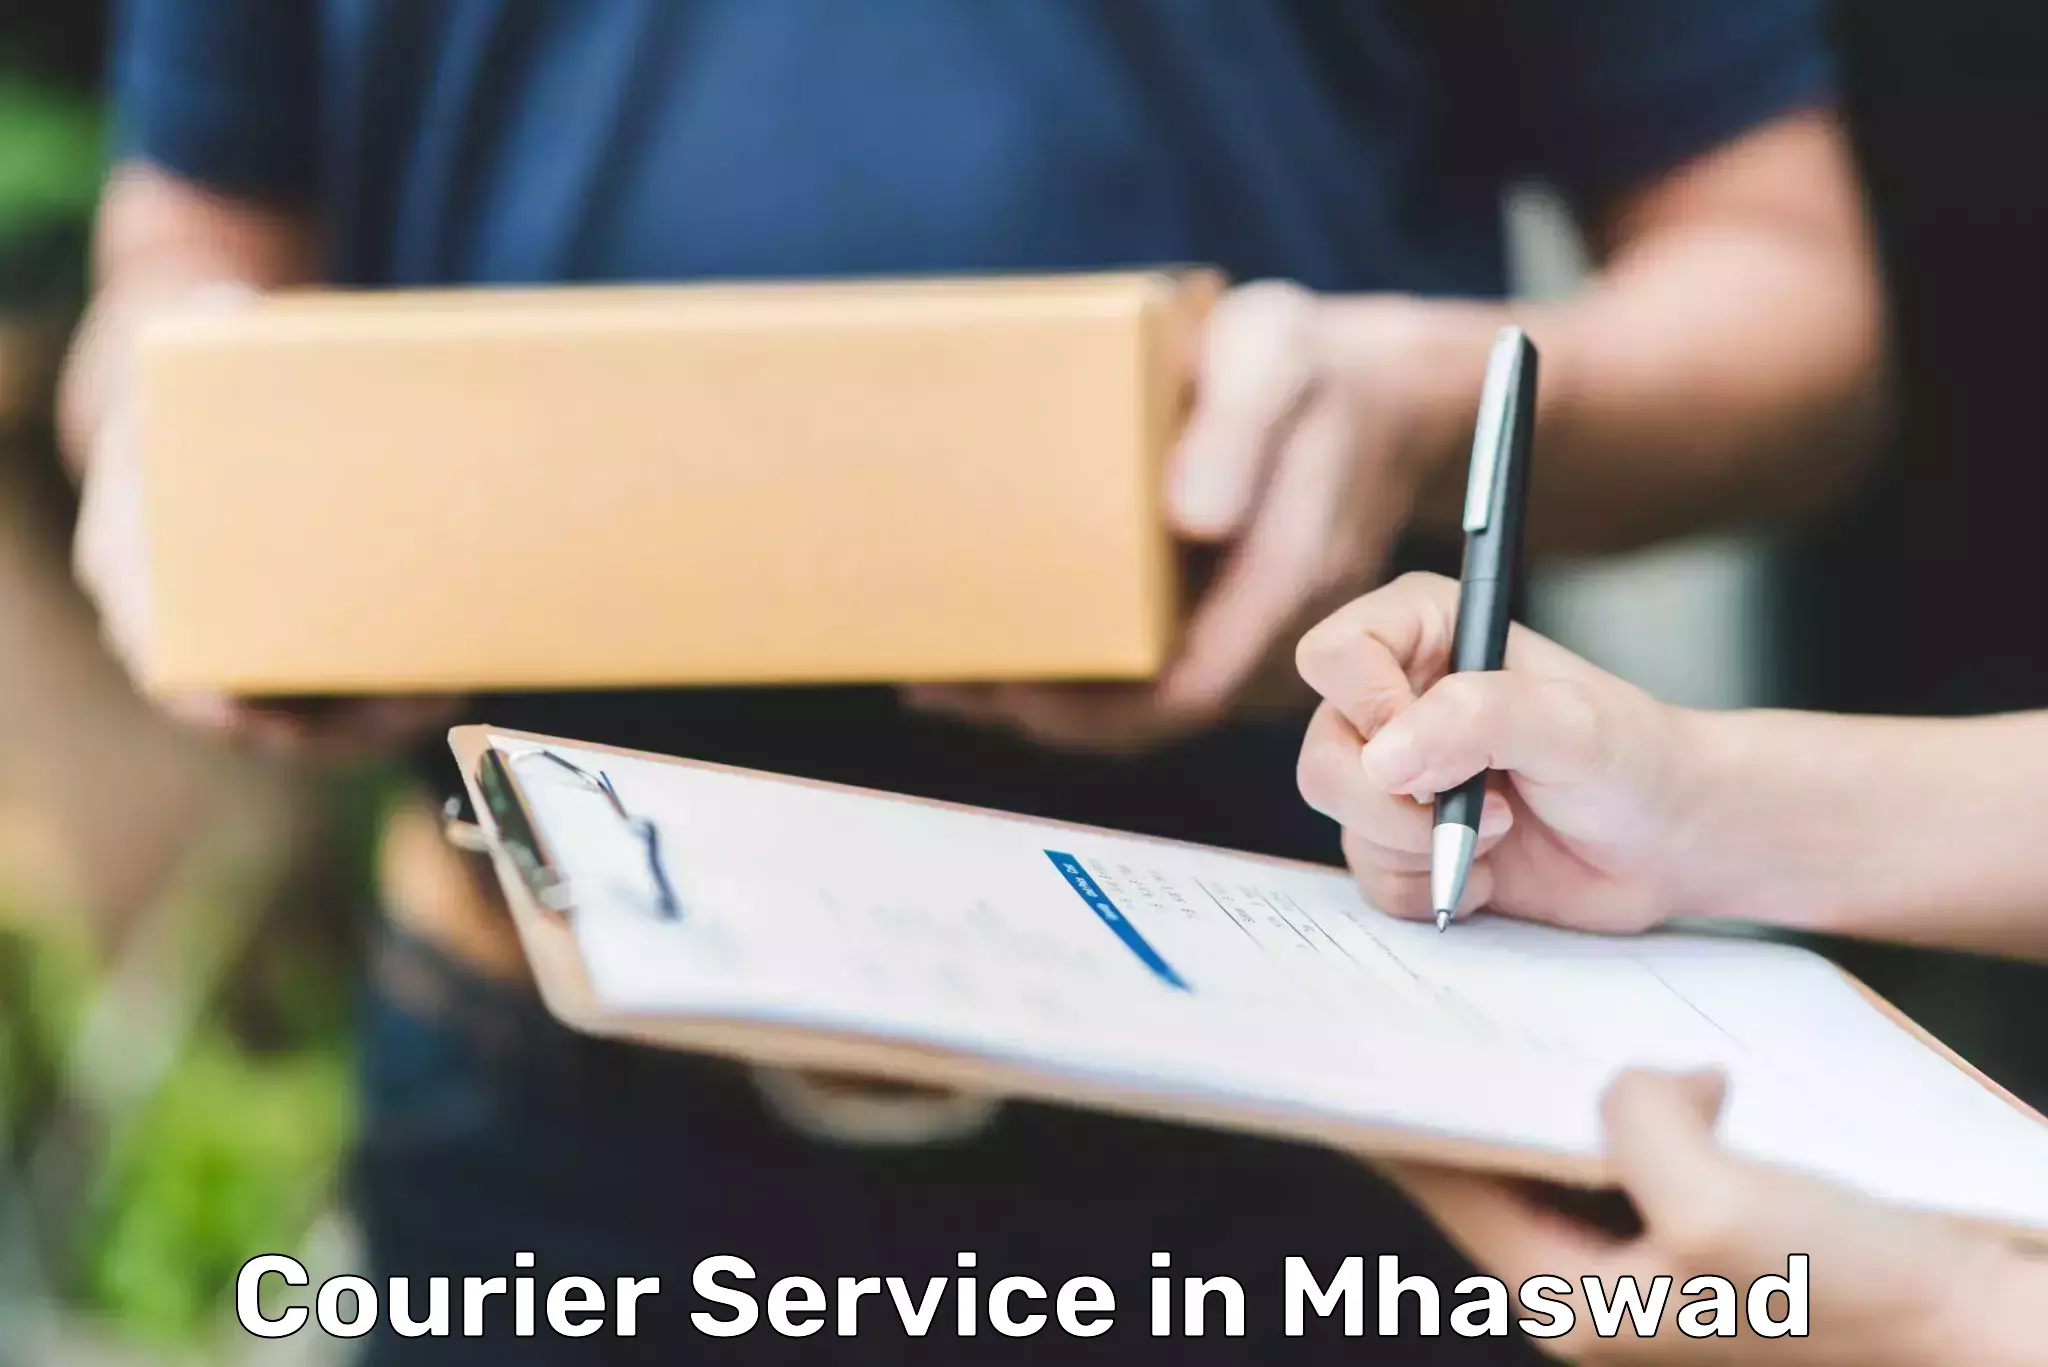 Courier membership in Mhaswad